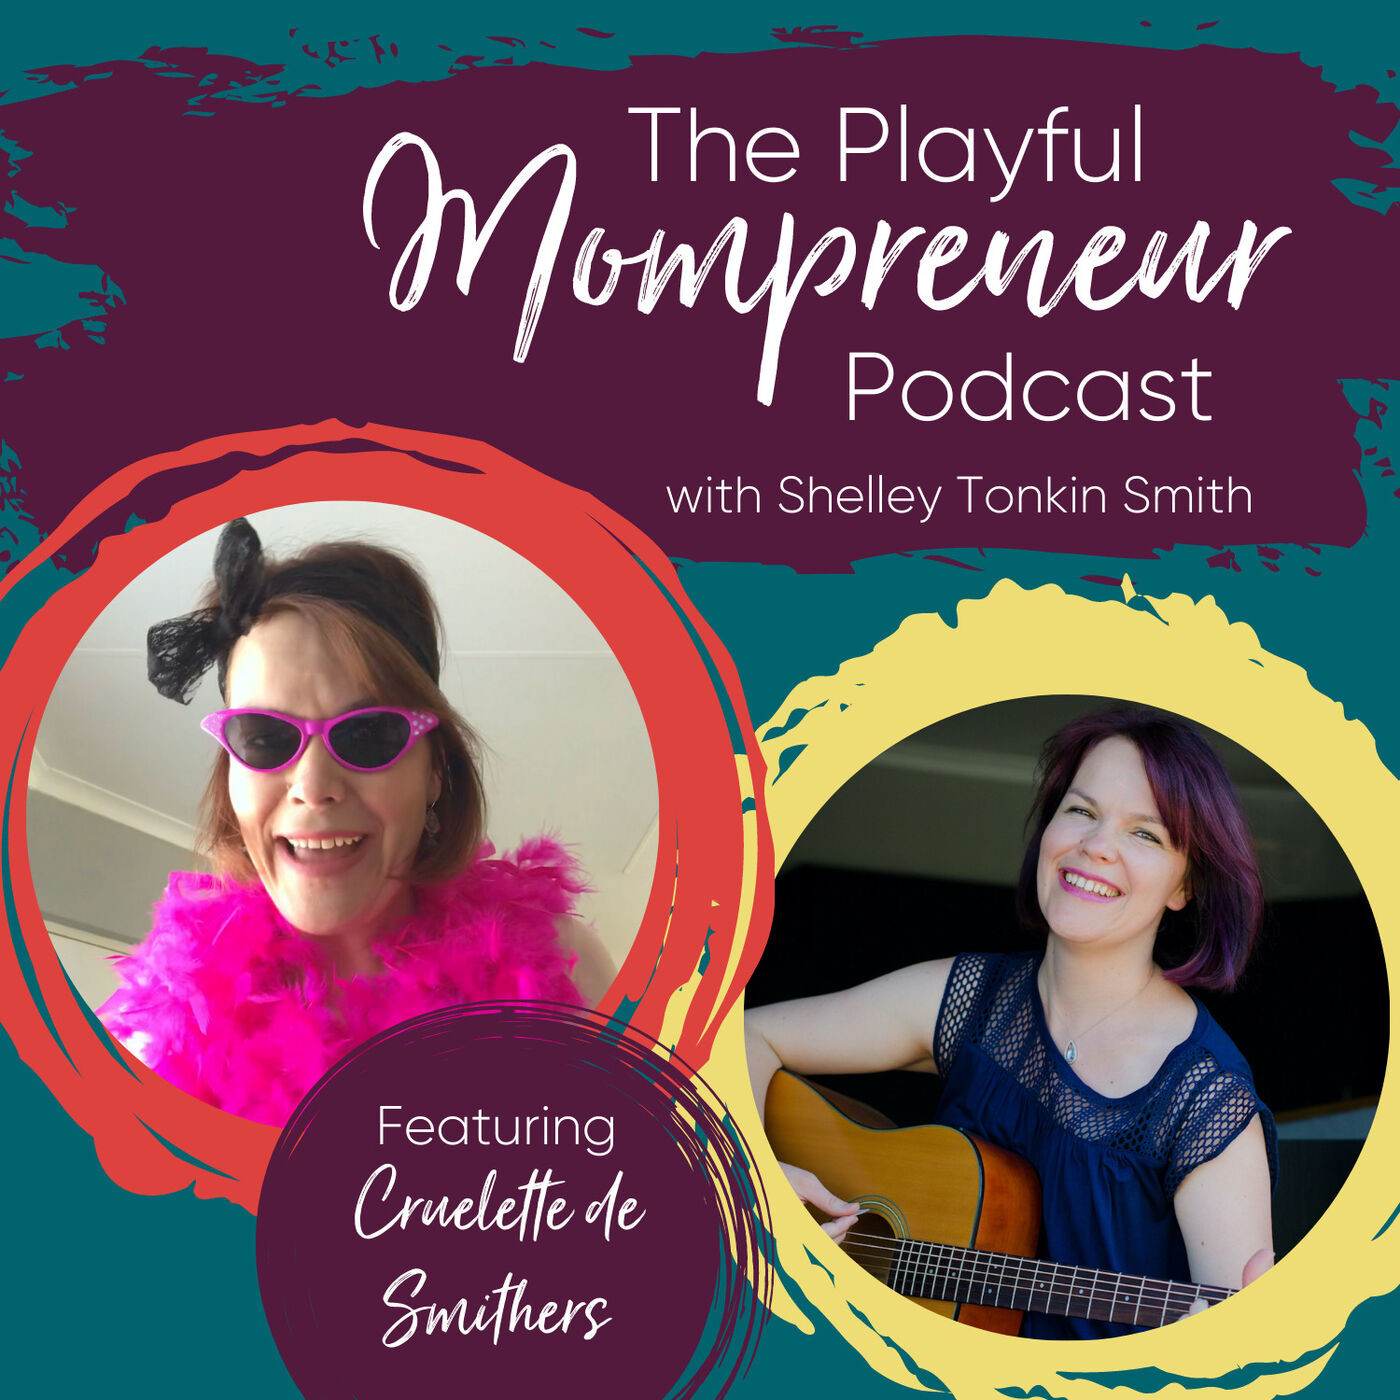 TPM #1: What does it mean to be a Playful Mompreneur? Shelley's inner critic, Cruelette de Smithers finds out...